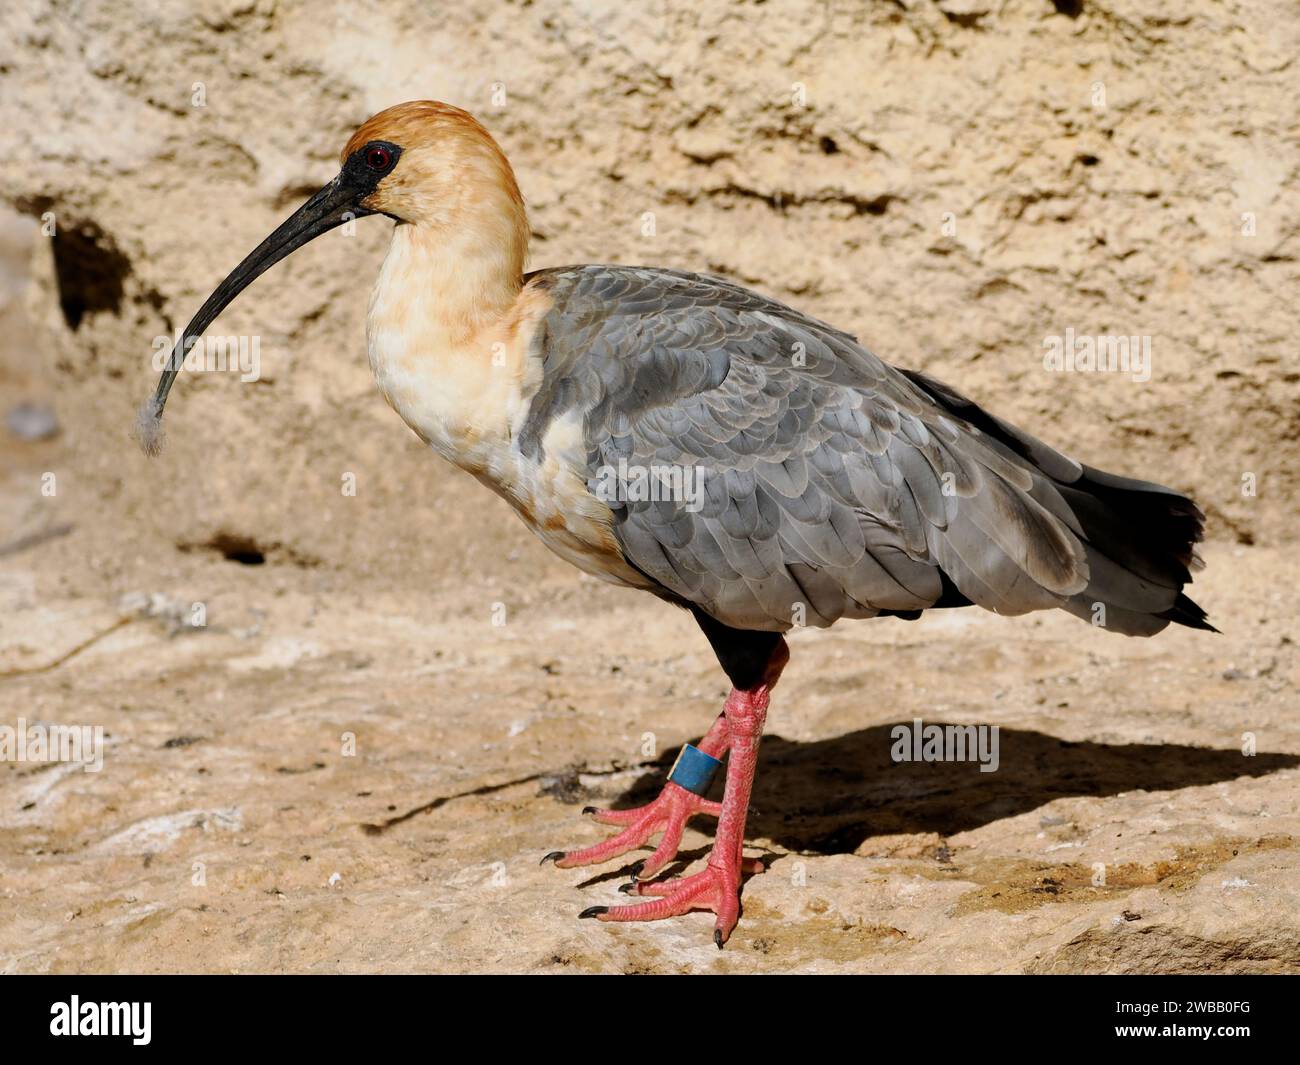 Closeup Black-faced Ibis (Theristicus melanopis) standing on rock and seen from profile Stock Photo